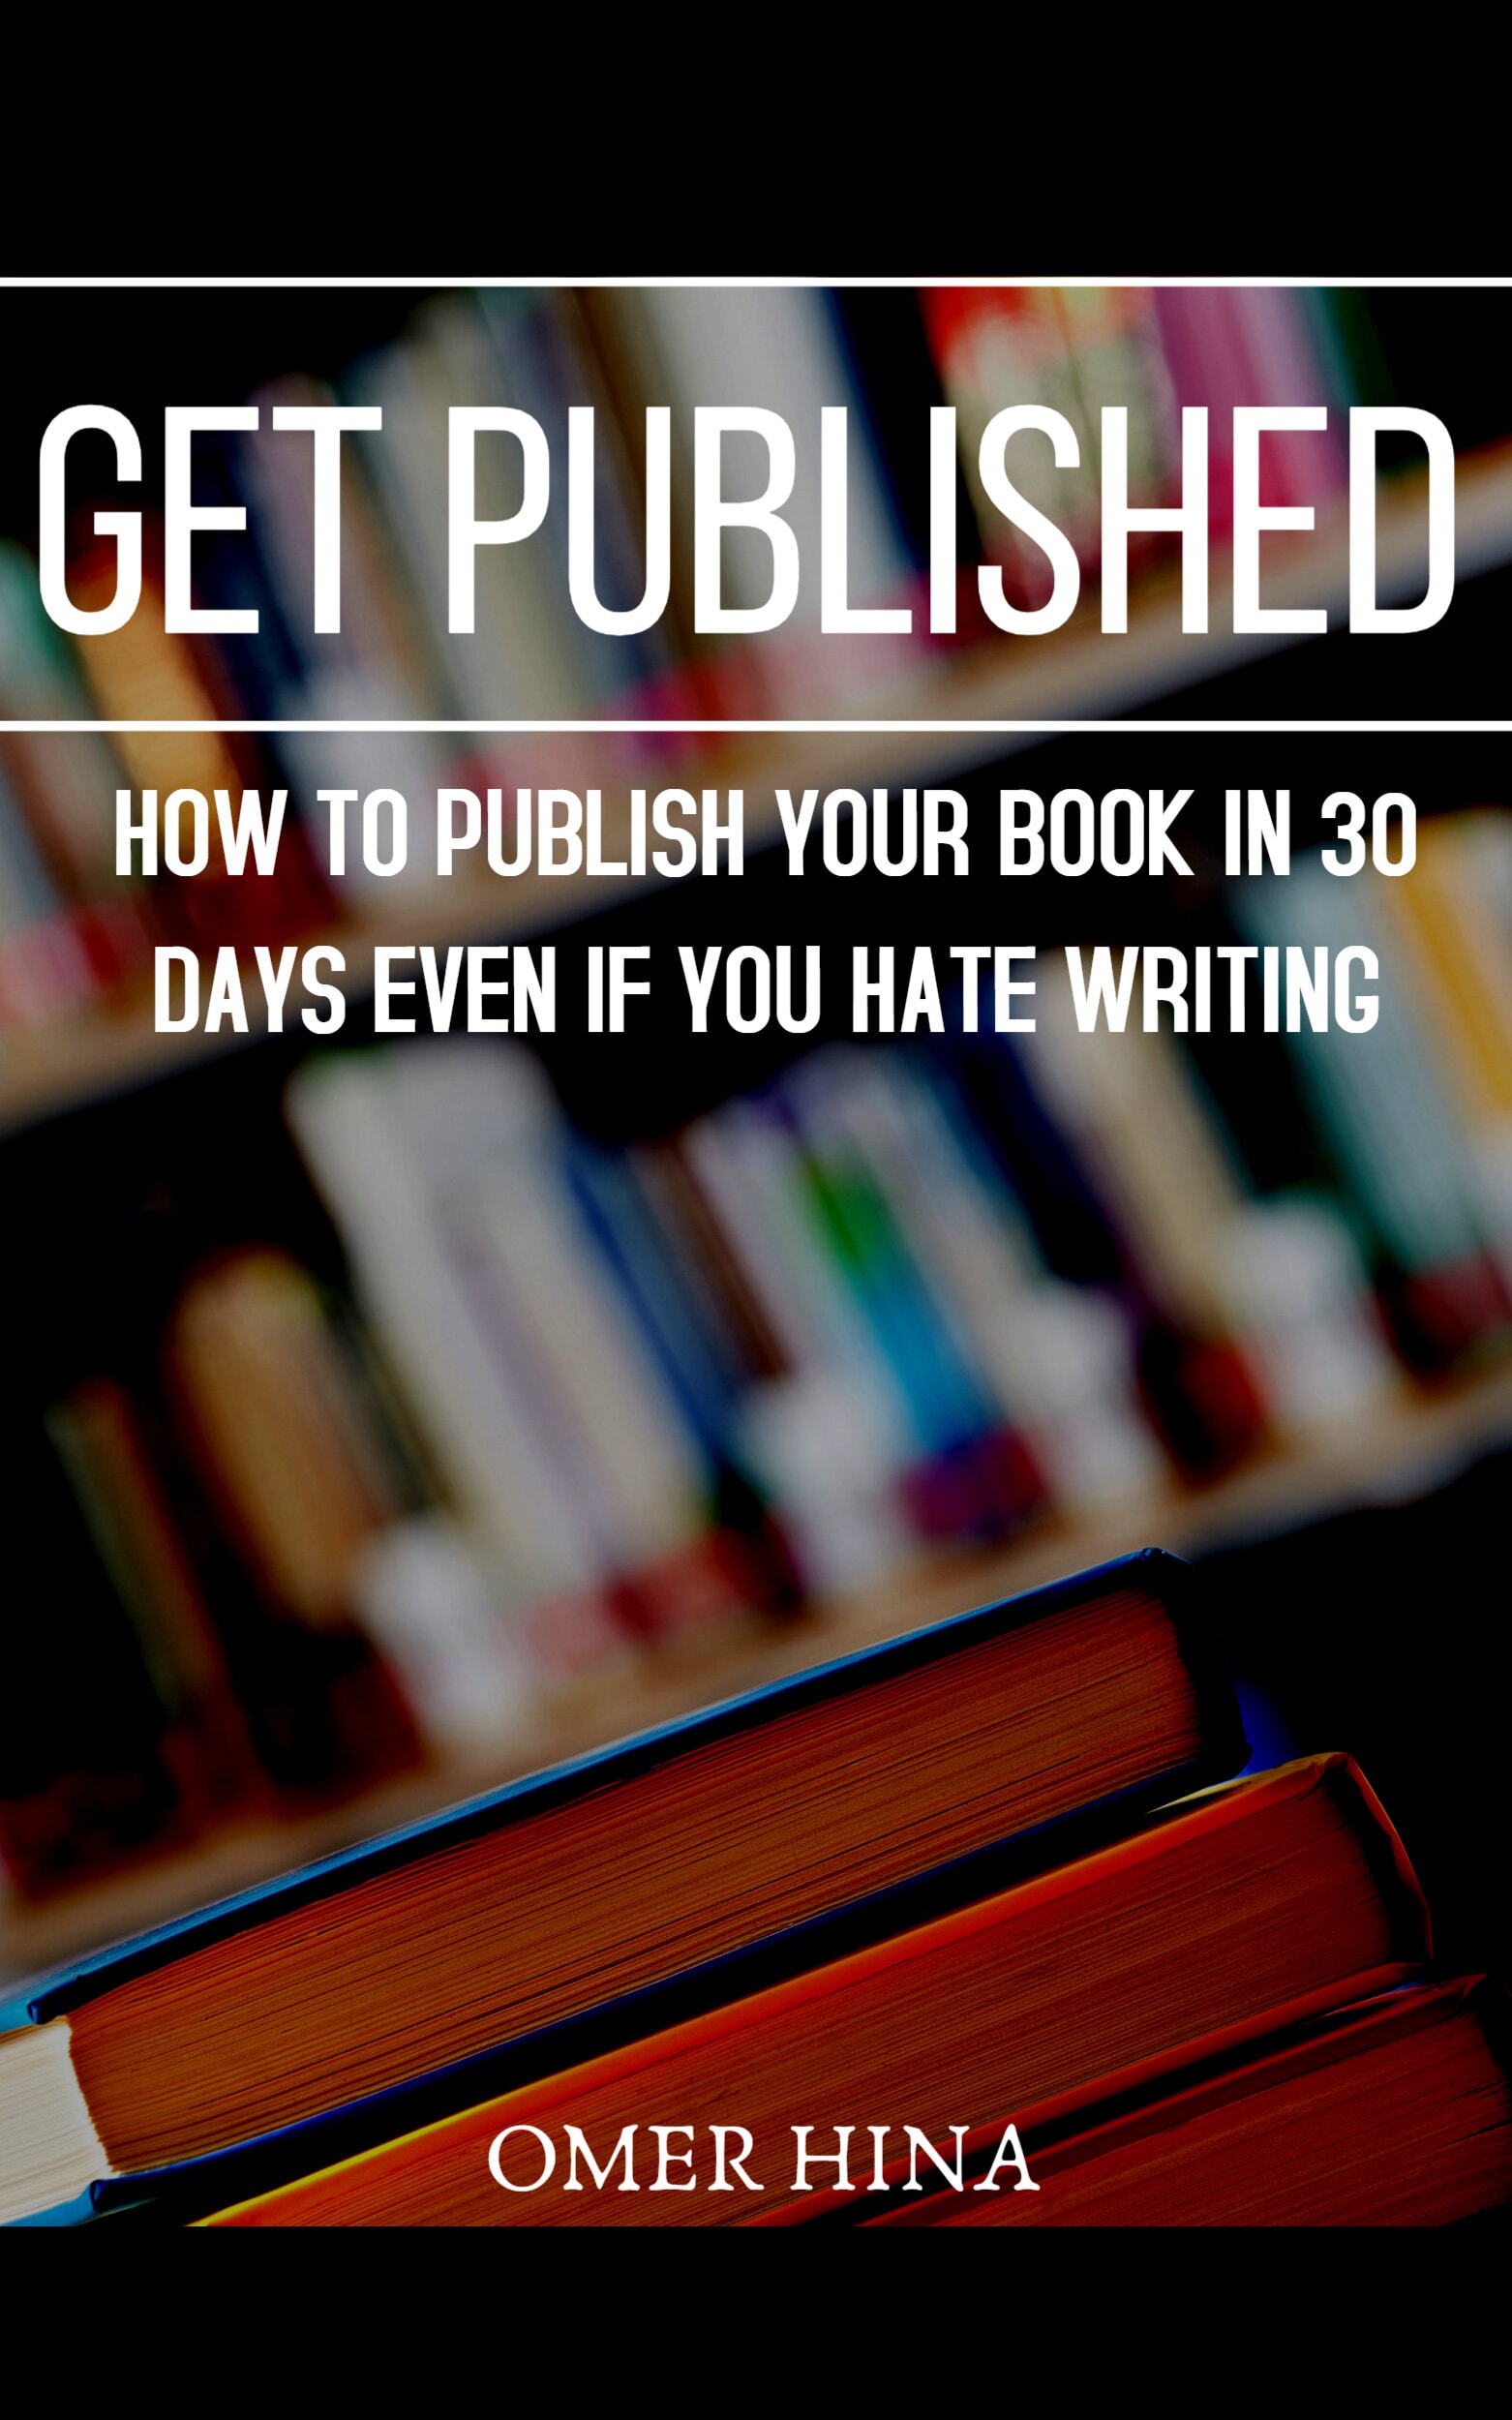 FREE: Get Published: How to Publish Your Book Online in 30 Days Even If You Hate Writing by Omer Hina